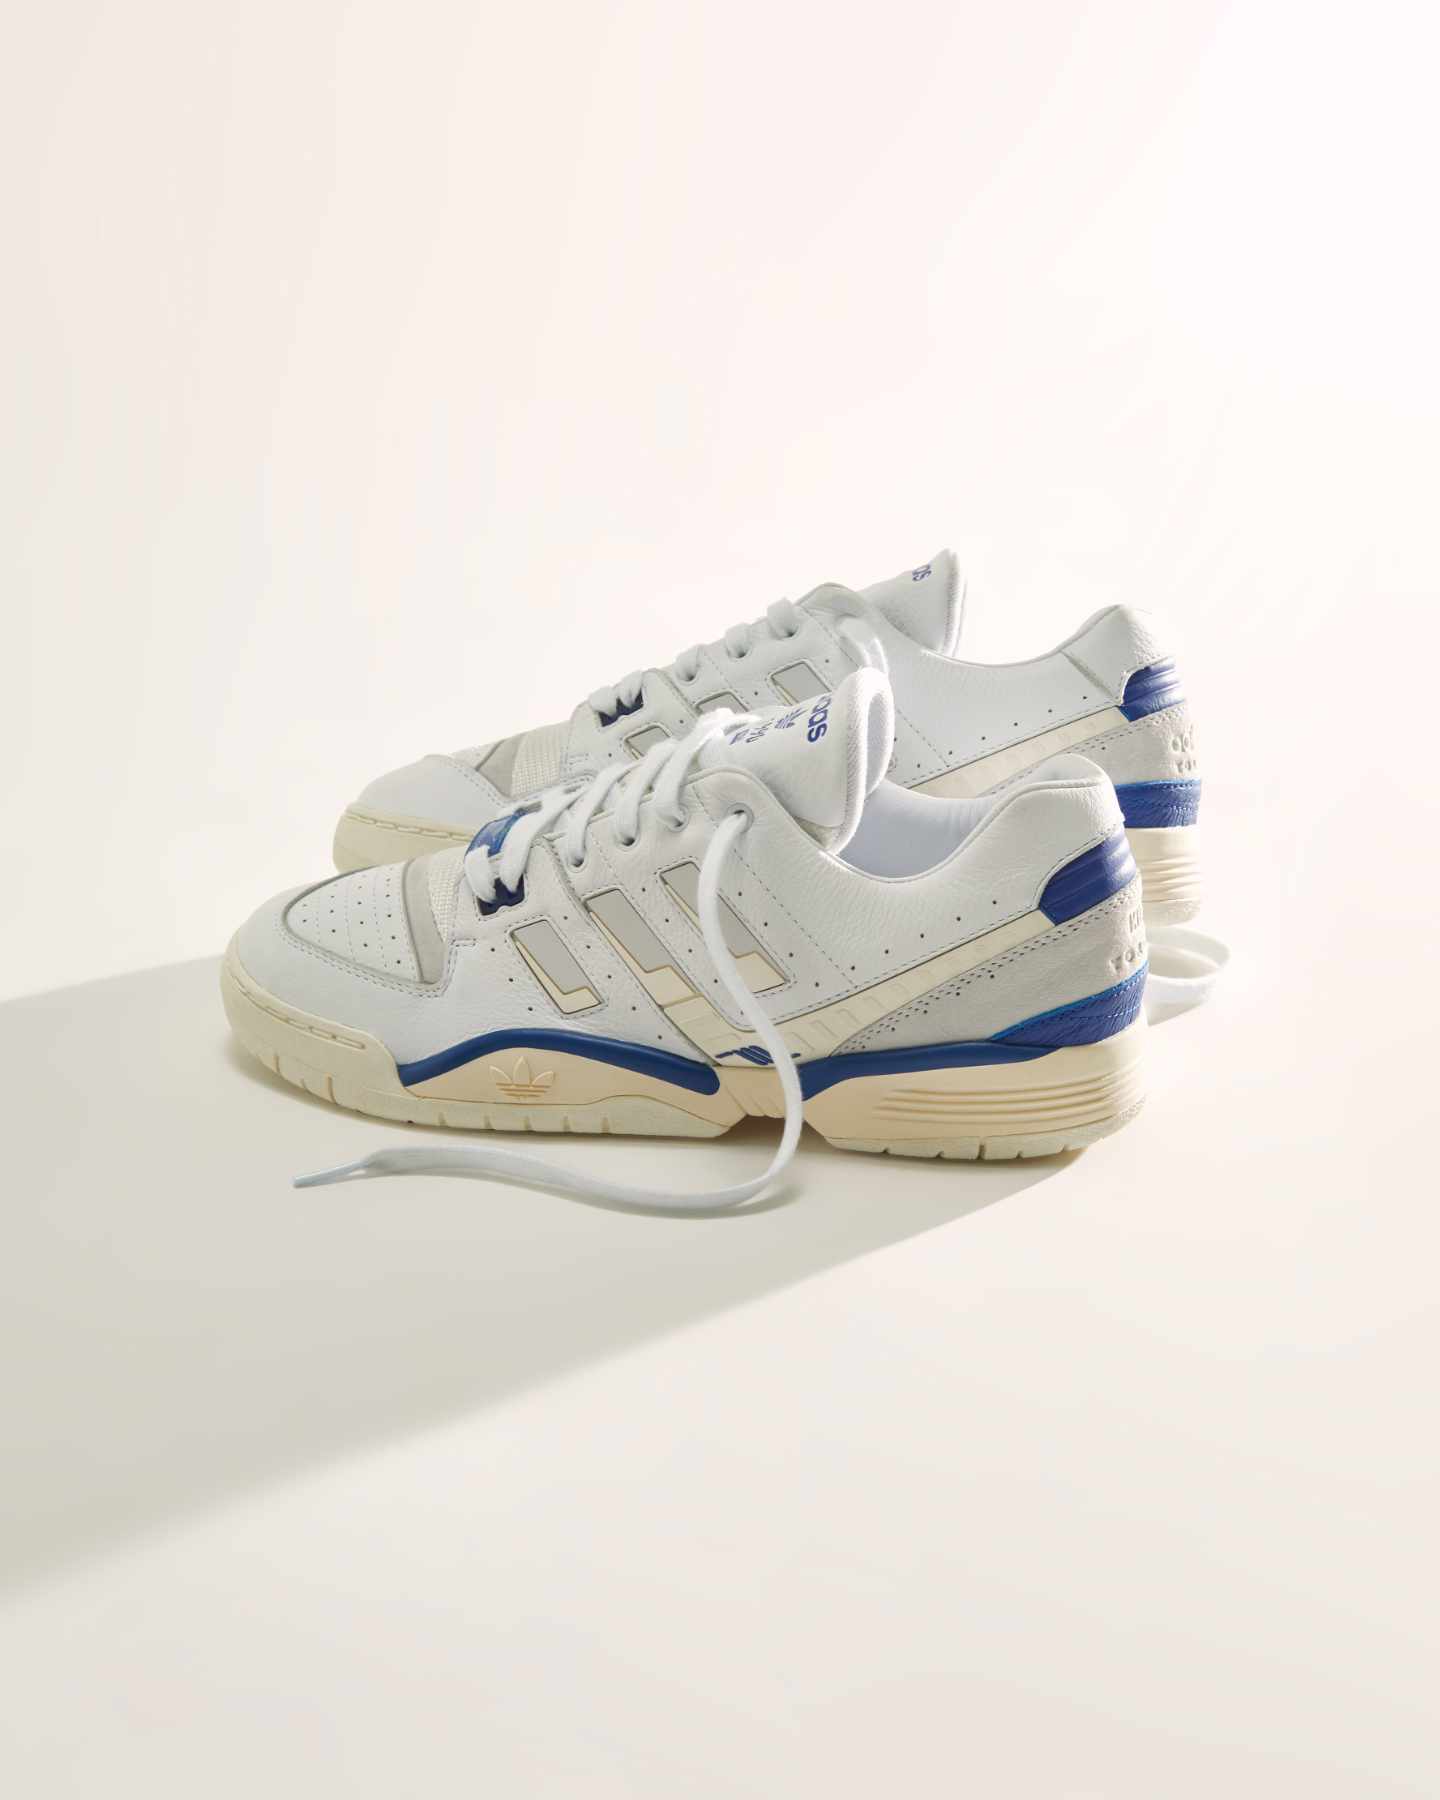 A product photo of KITH & adidas' Torsion Edberg Fall 2023 Classics shoe collaboration prior to release date